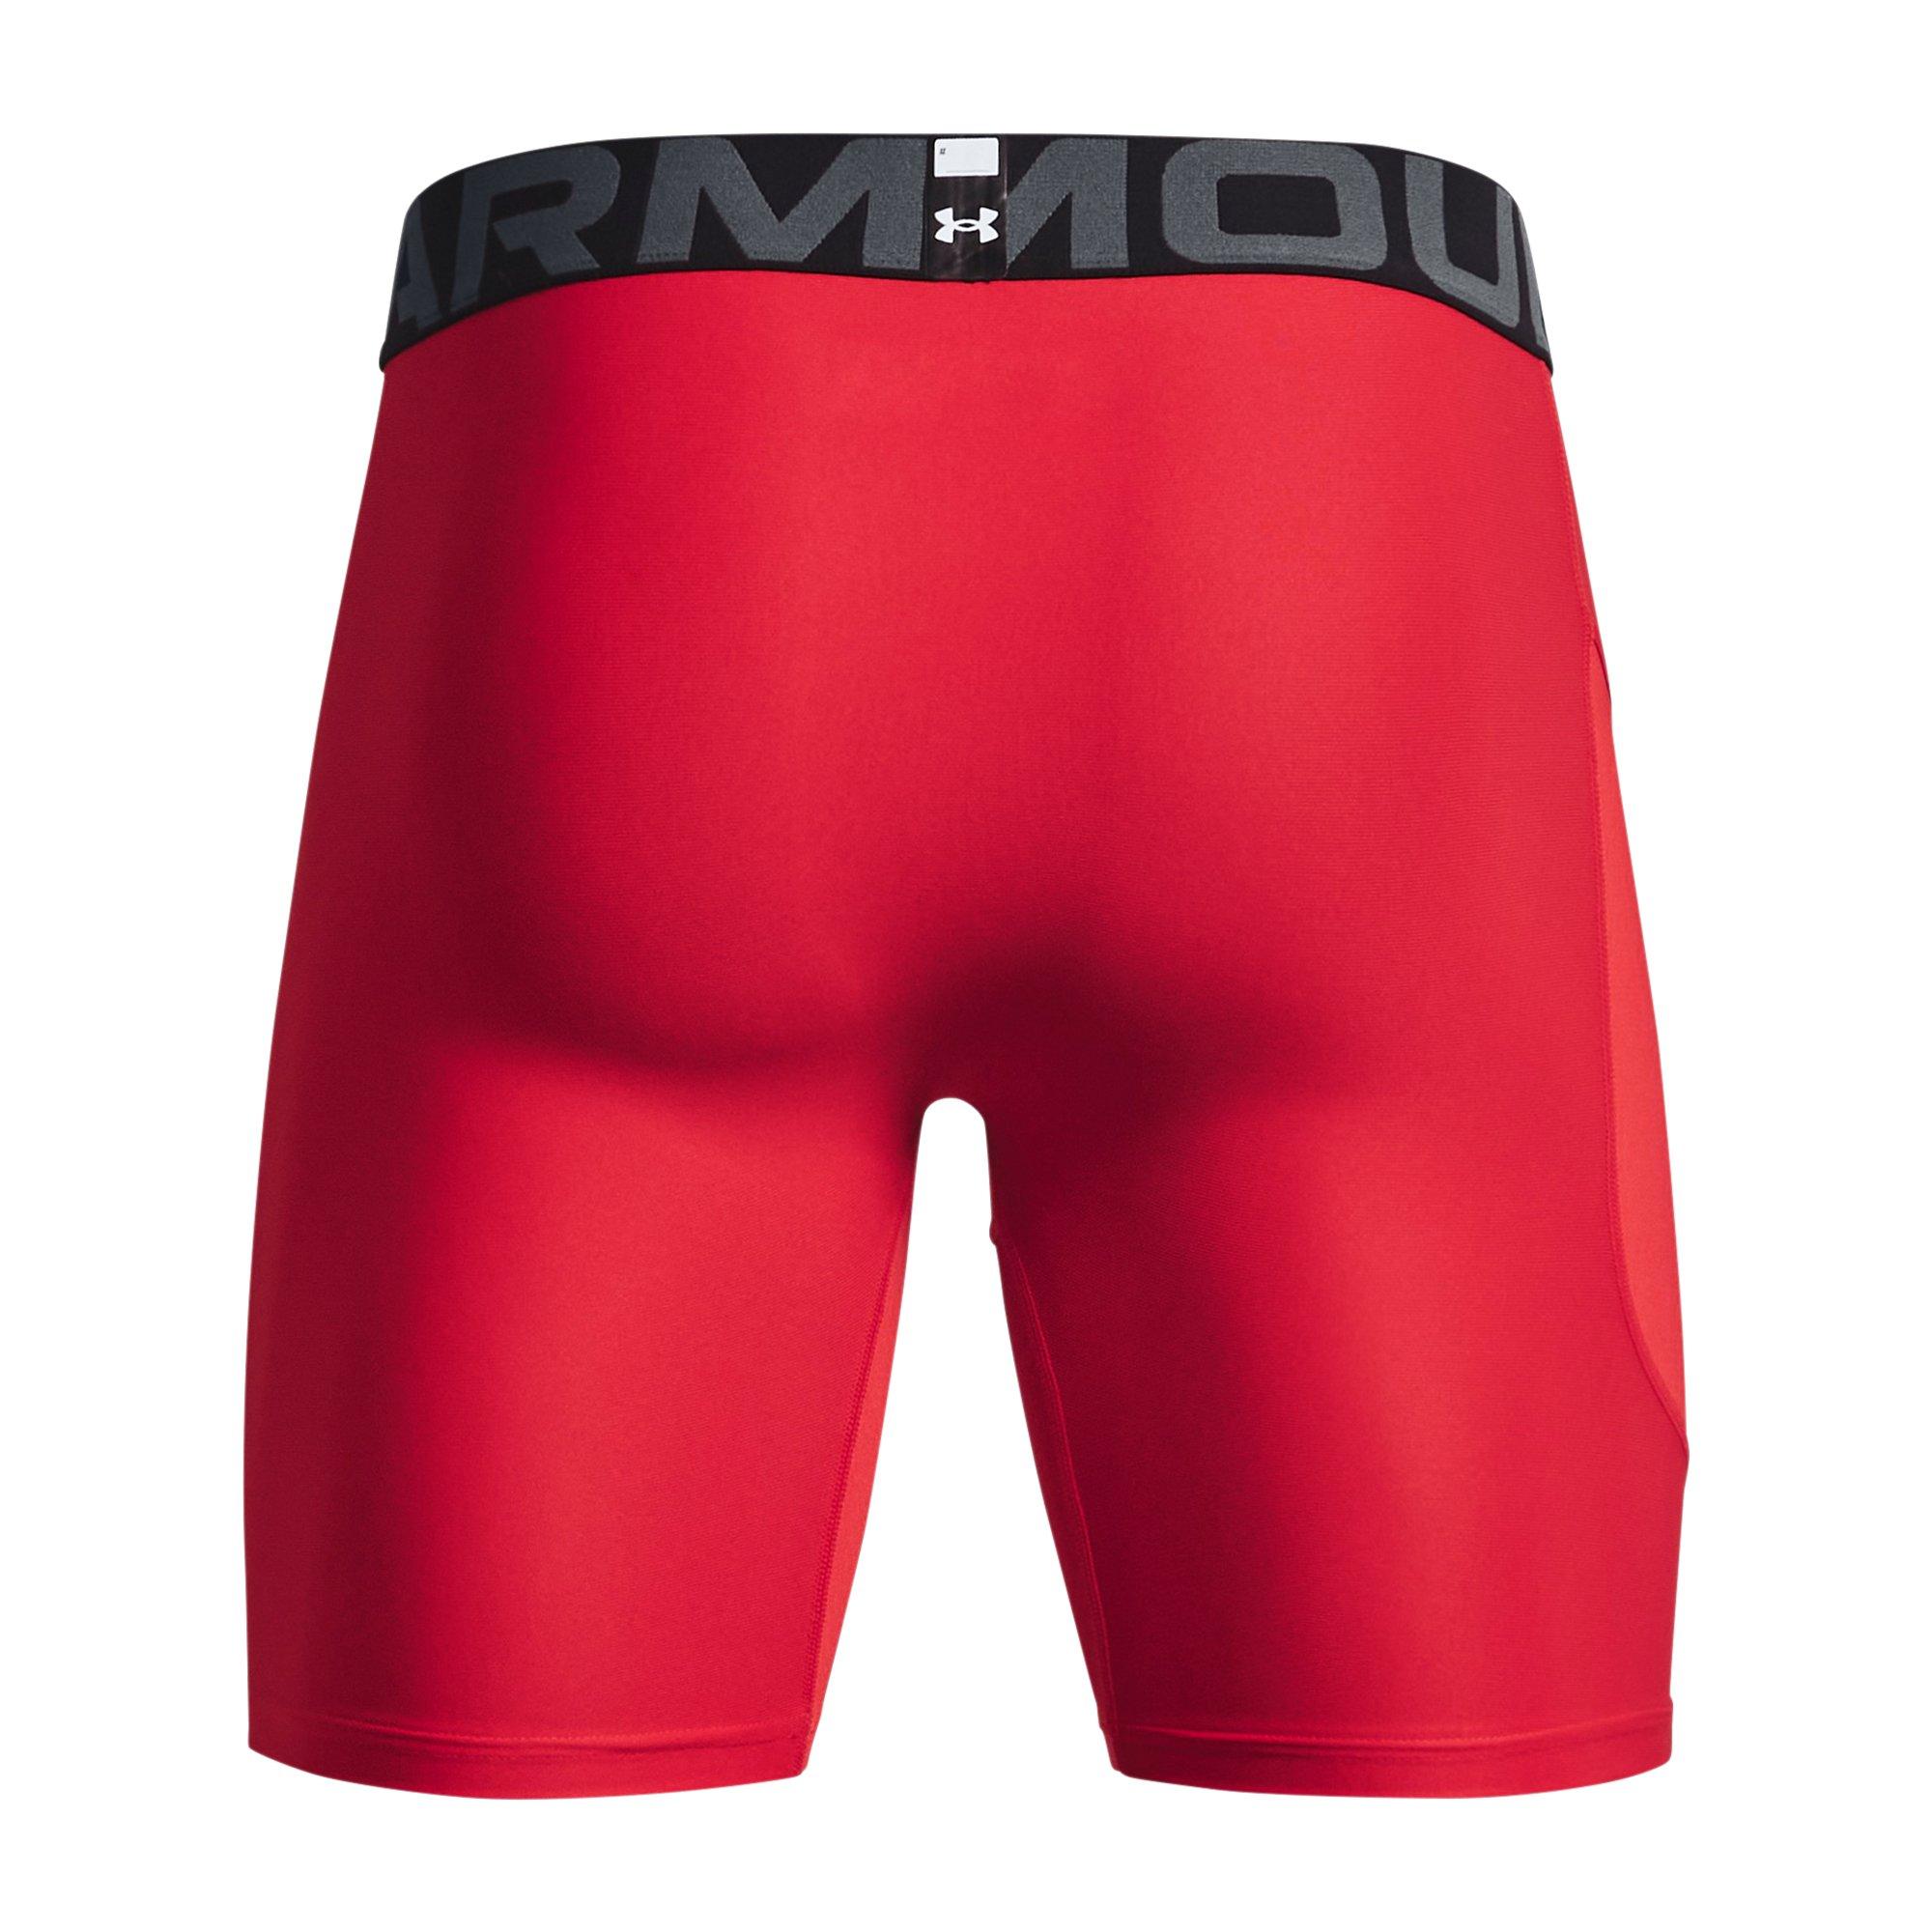 Under Armour Men's HeatGear Armour Compression Shorts-Red